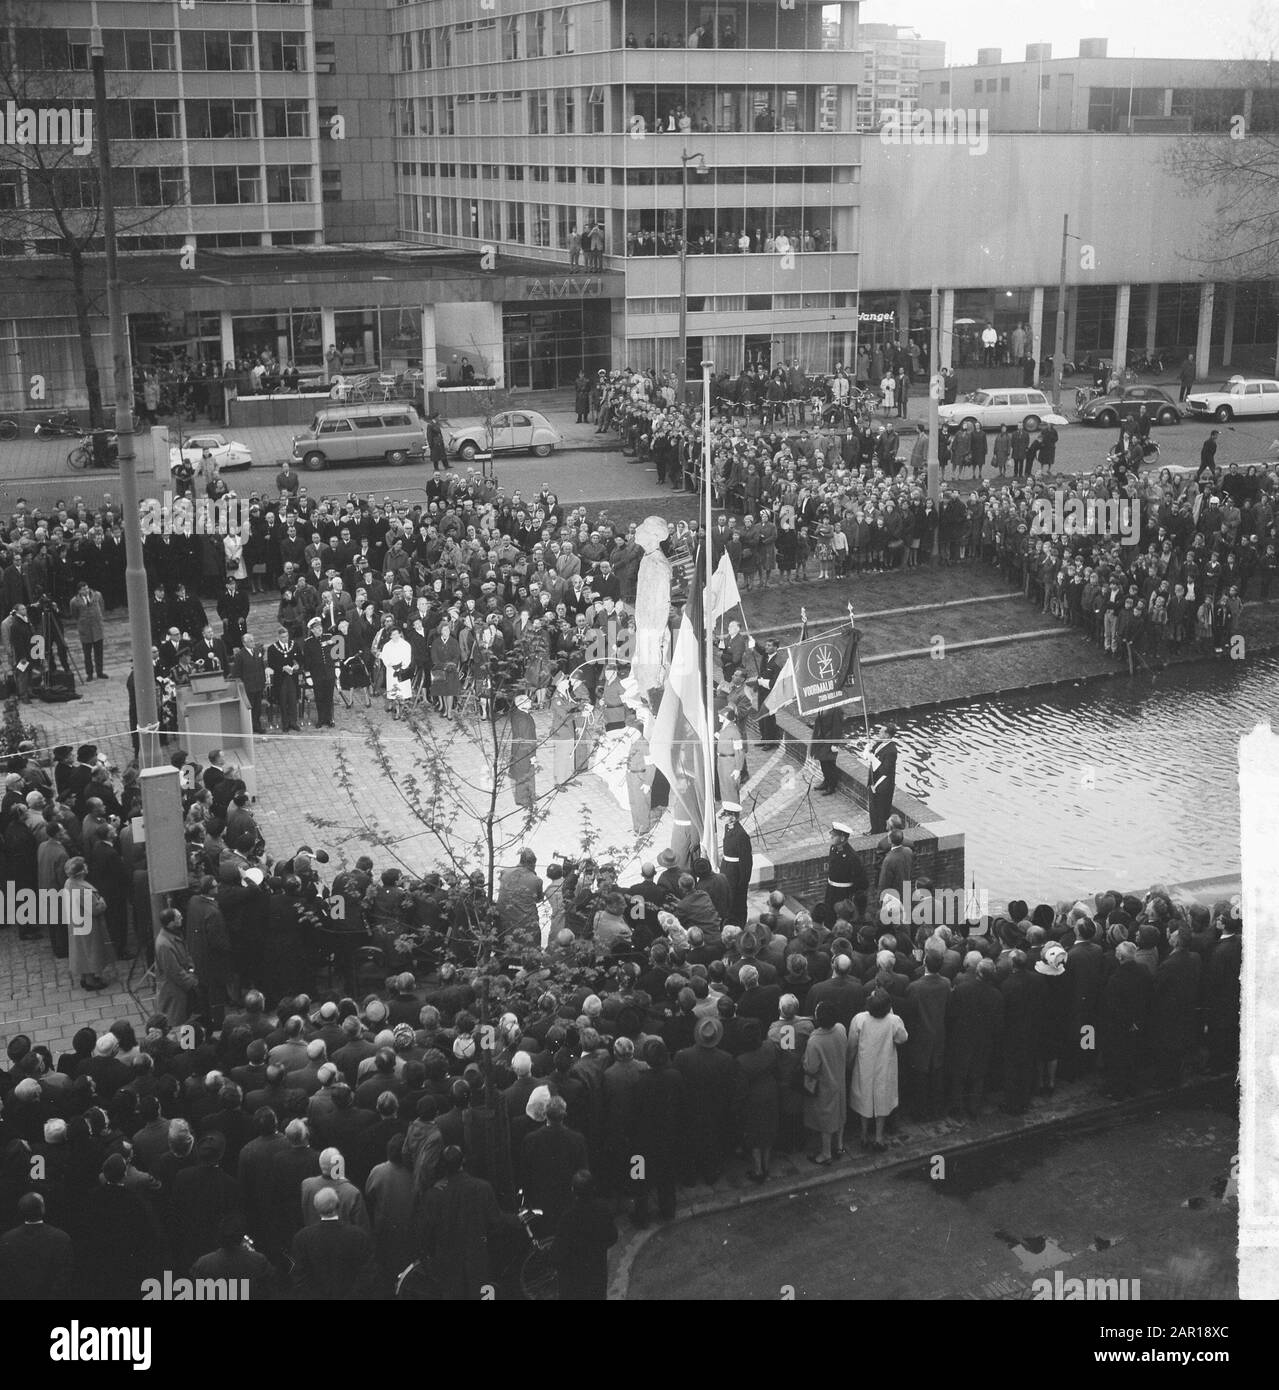 Prins Bernhard revealed the resistance monument Unbroken Resistance to the Westersingel in Rotterdam Annotation: The statue is a design by Hubert C.M. van Lith Date: 11 May 1965 Location: Rotterdam, Zuid-Holland Keywords: revelations, war monuments, resistance Stock Photo